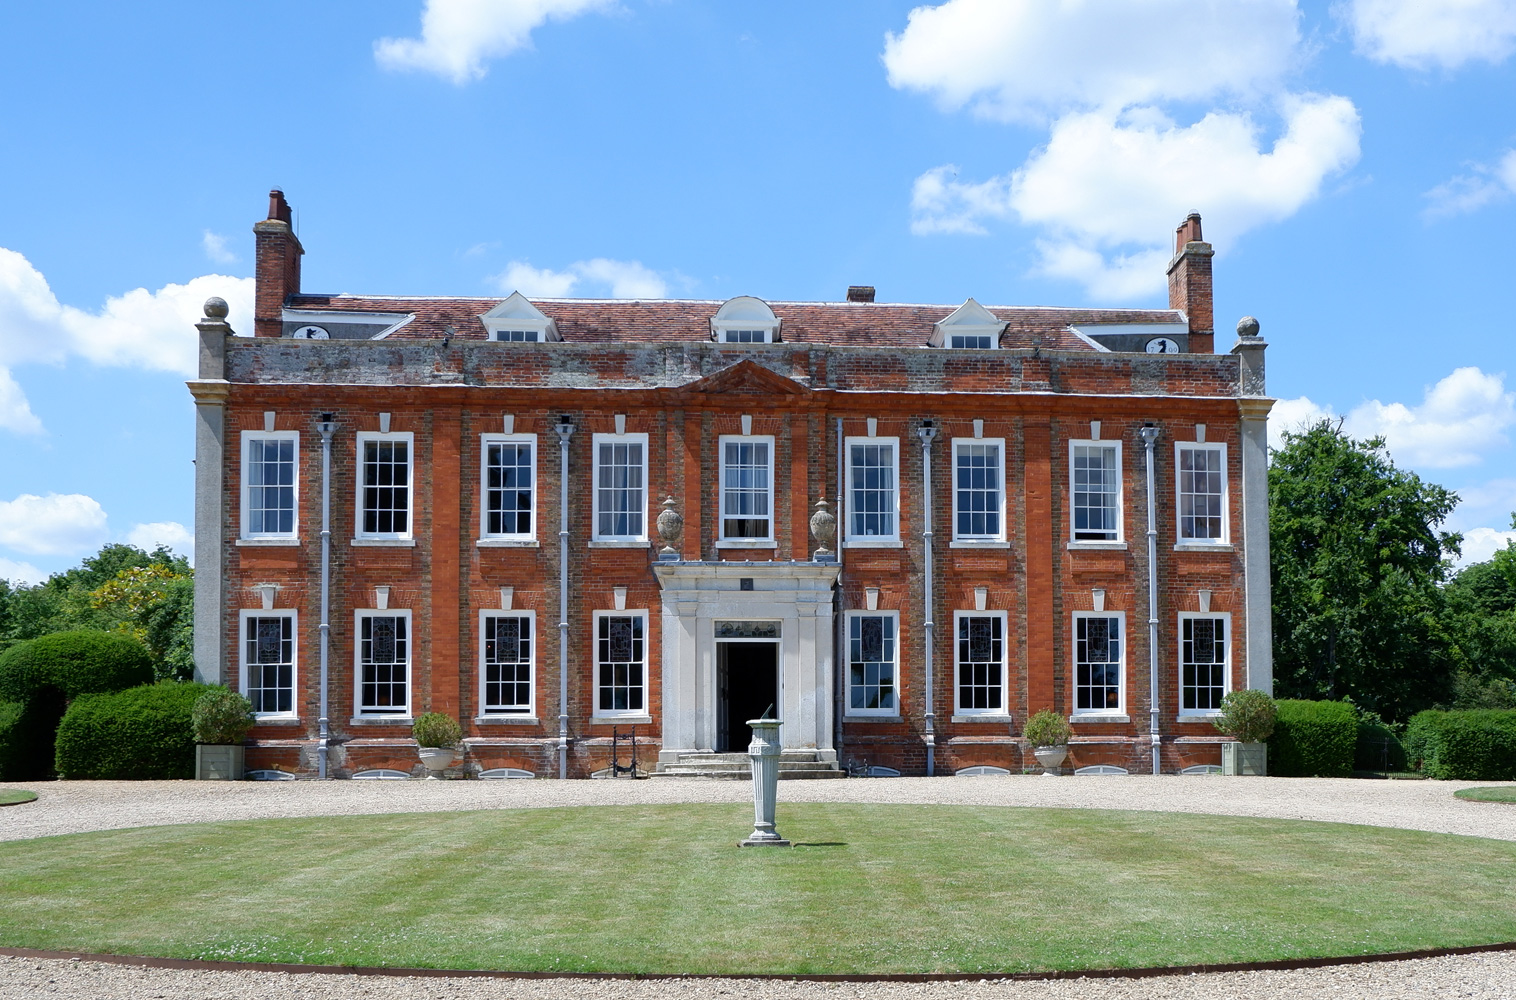 Belchamp Hall, owned by the Raymond family since 1611